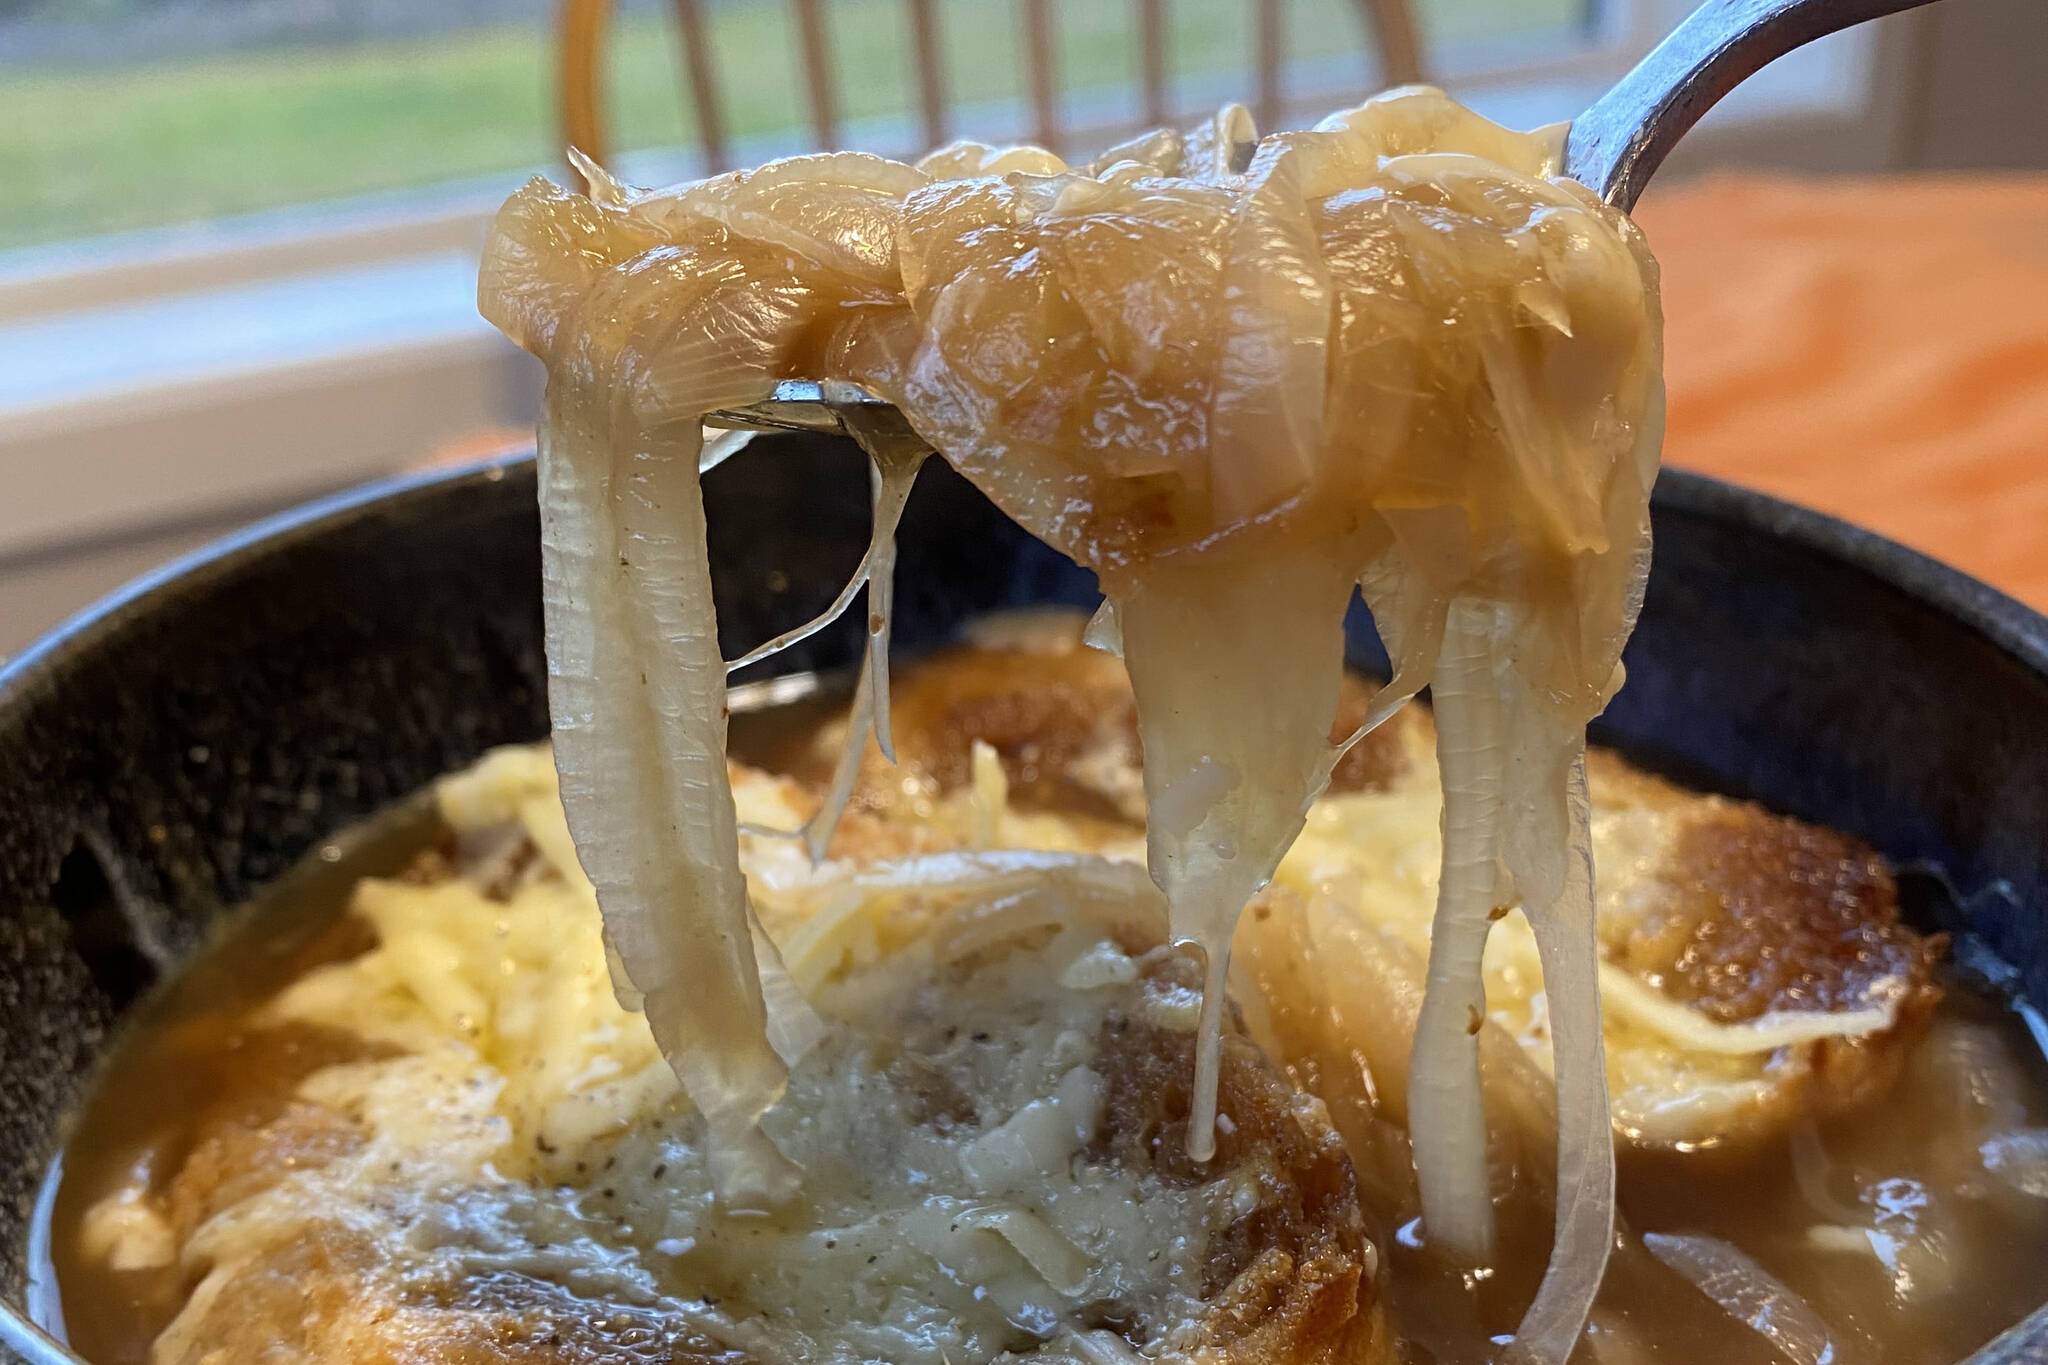 Onions are sauteed, doused in broth and then topped off with cheese and bread in this recipe for French Onion Soup. (Photo by Tressa Dale/Peninsula Clarion)